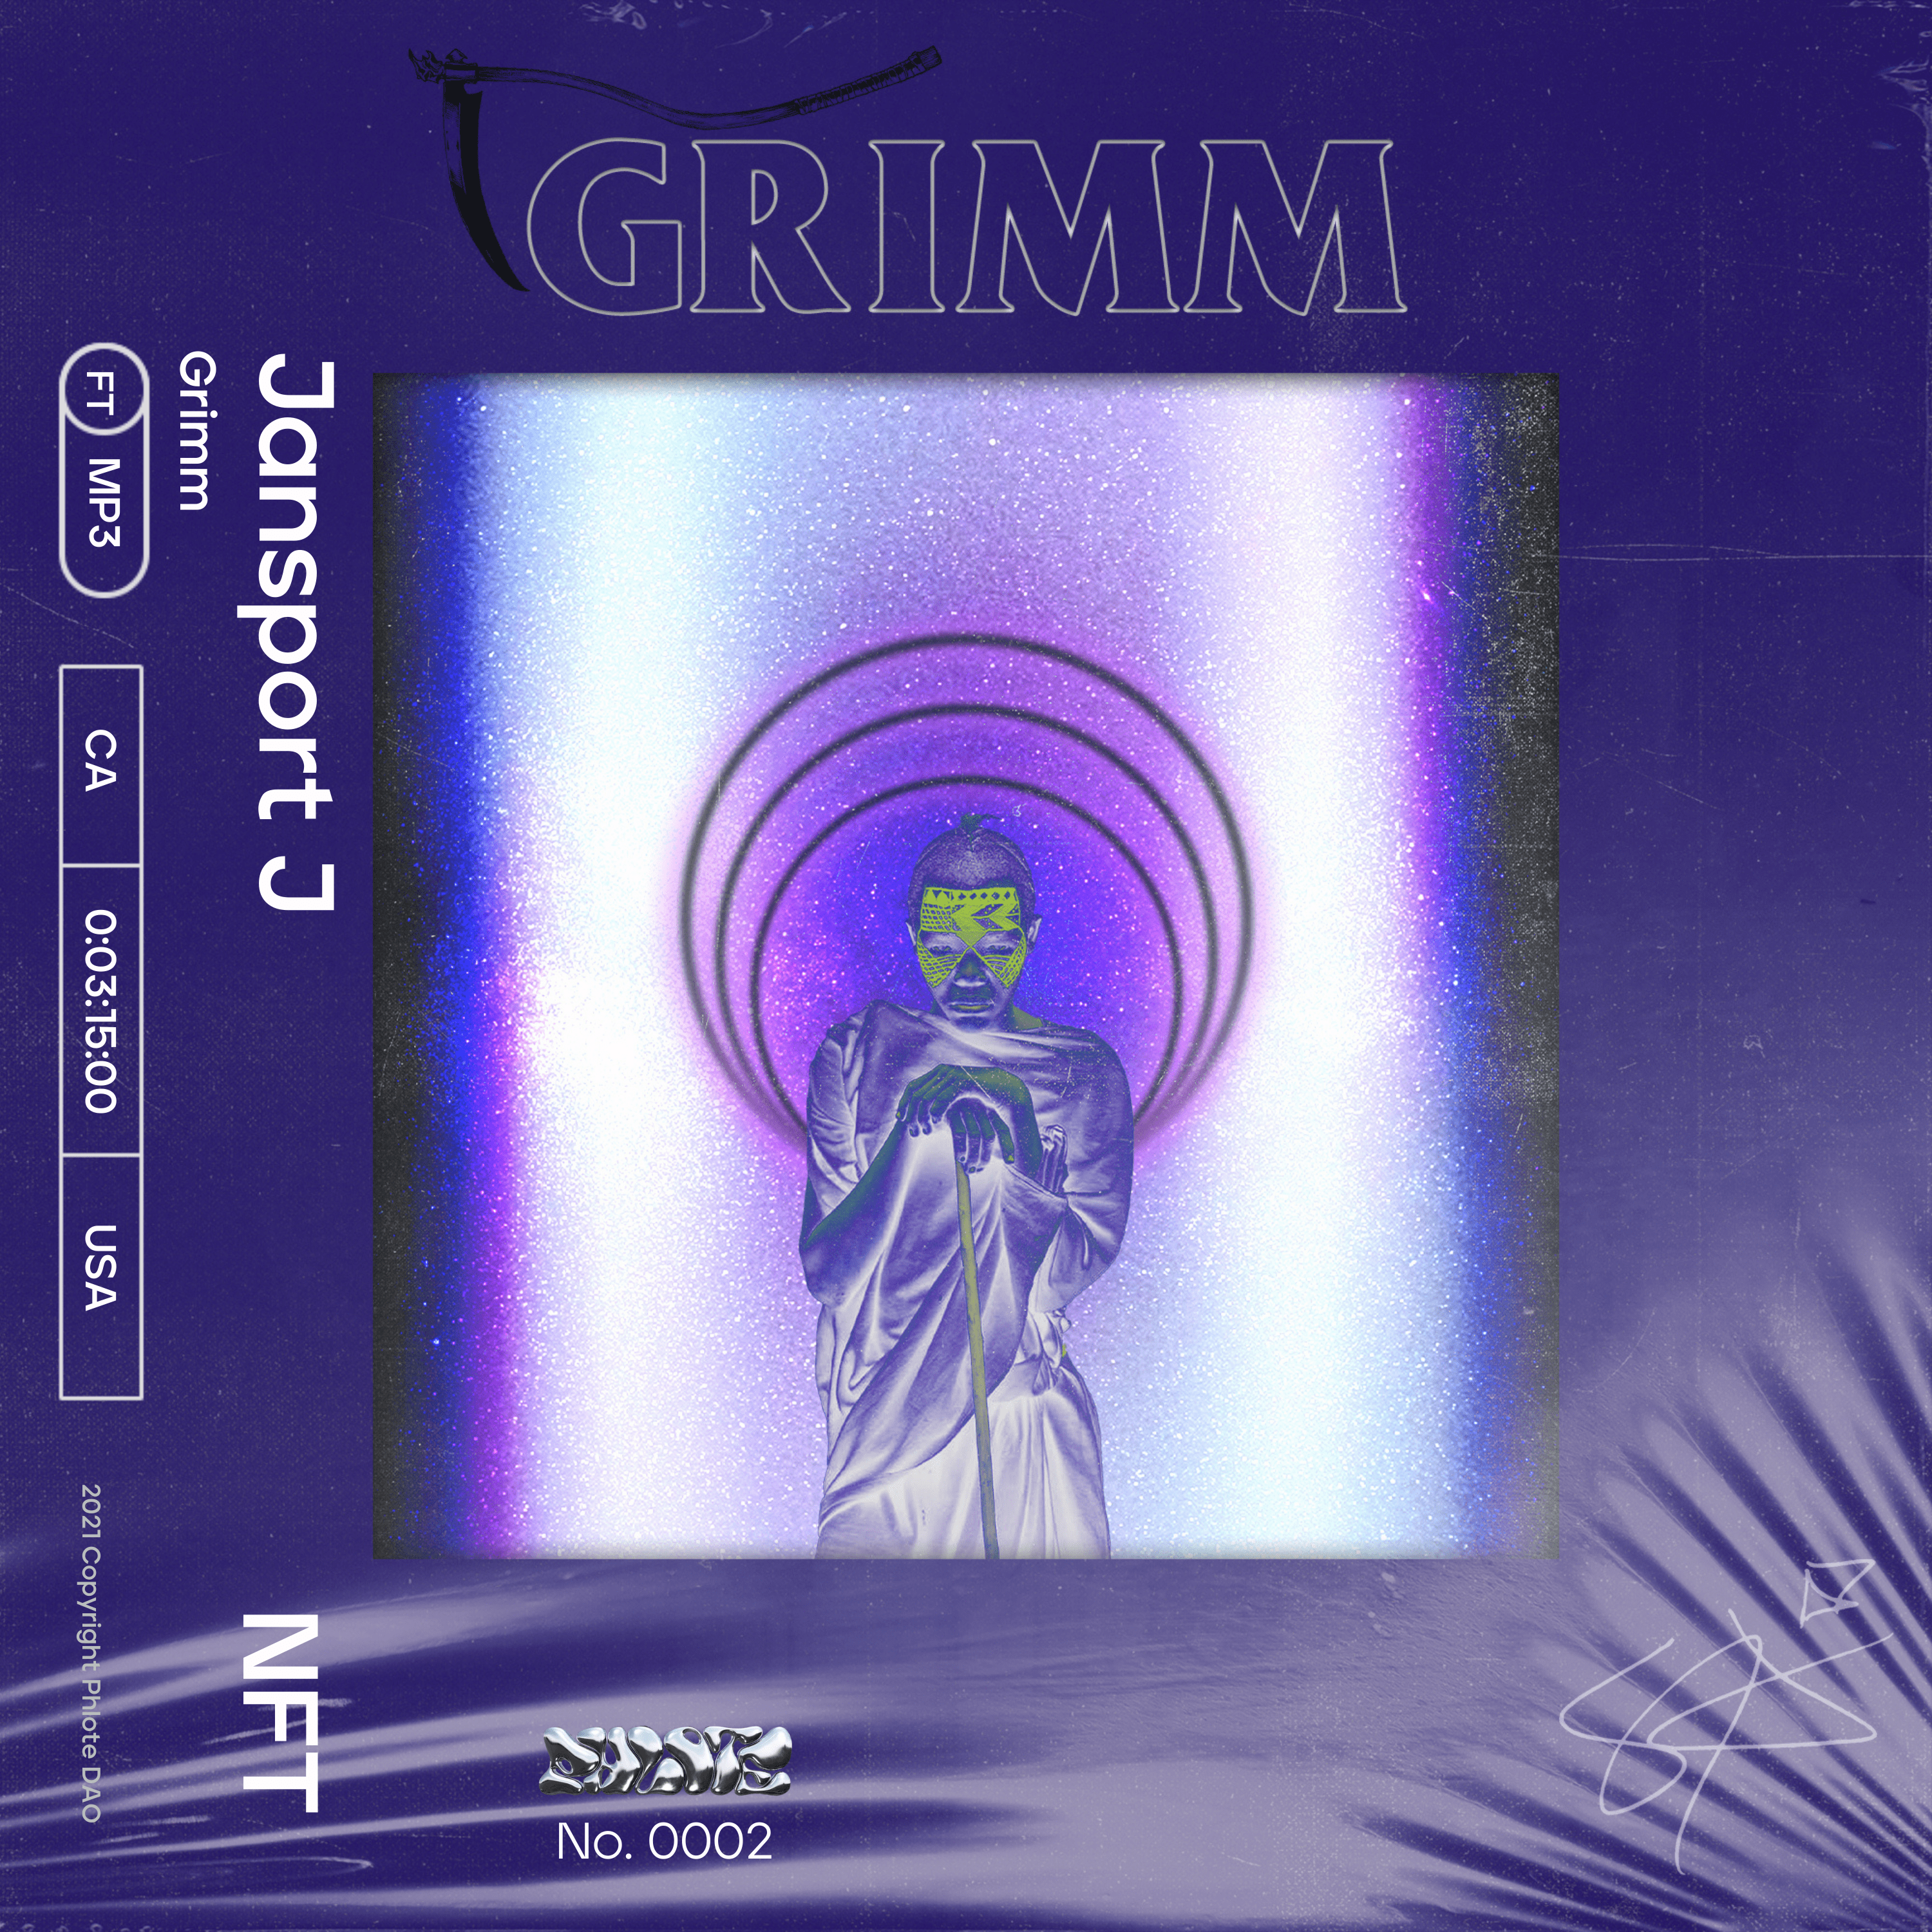 Cover art for Grimm by Jansport J